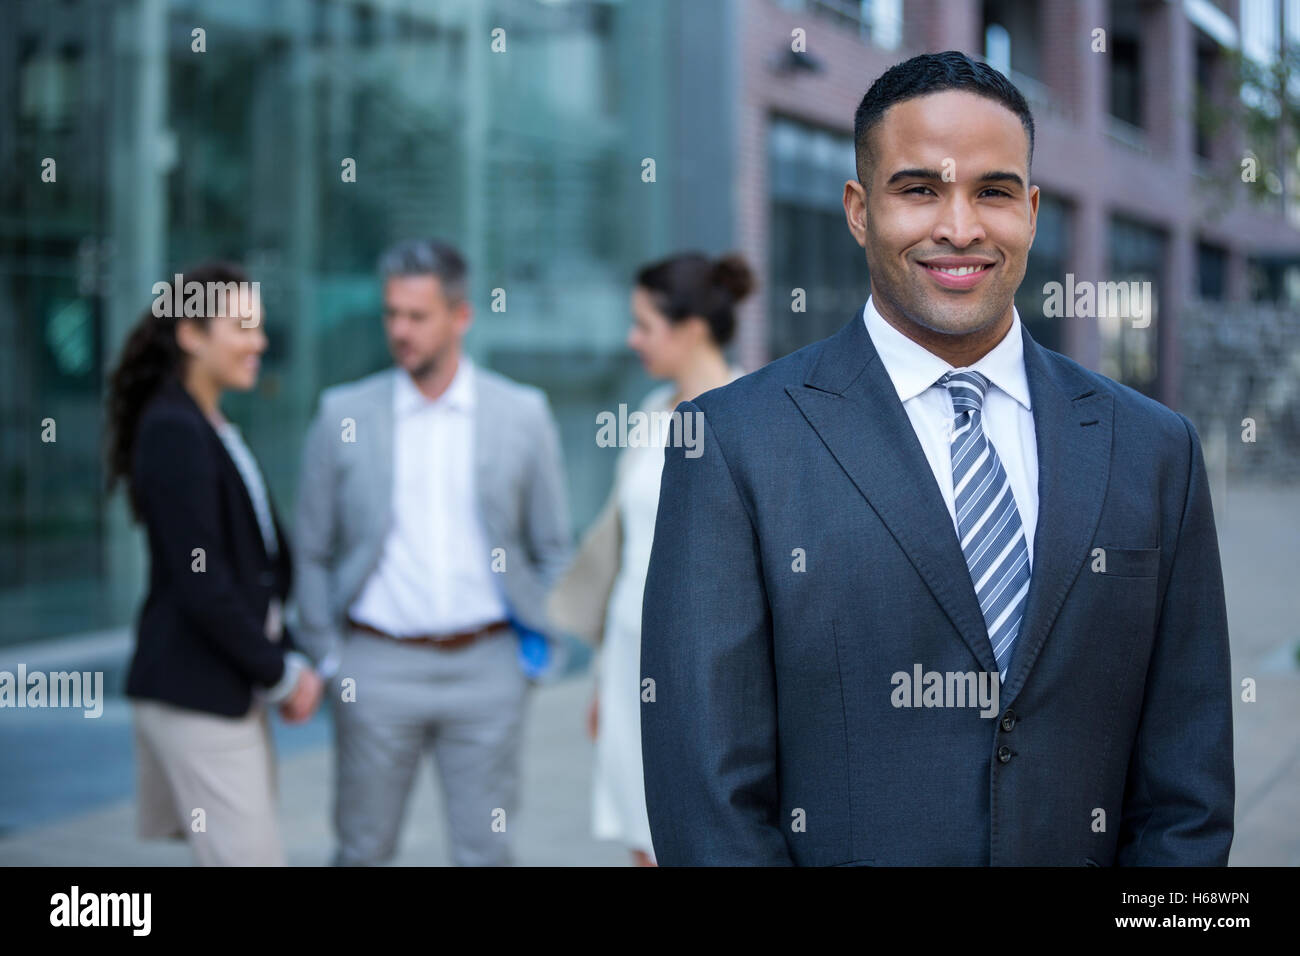 Smiling businessman standing in office building Stock Photo